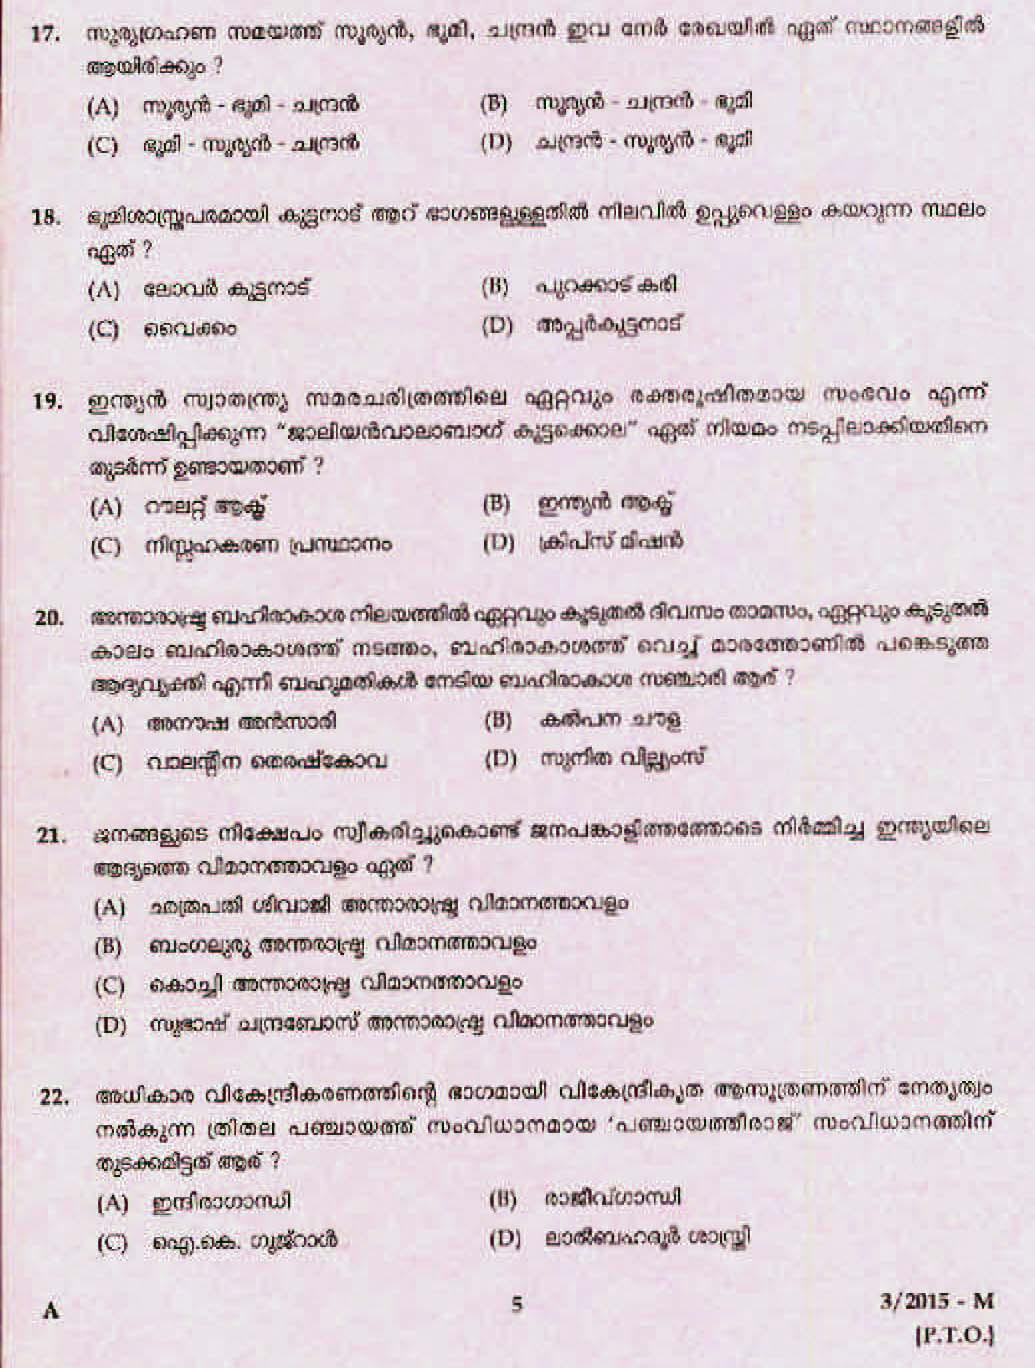 LD Clerk Thrissur District Question Paper Malayalam 2015 Paper Code 32015 M 3